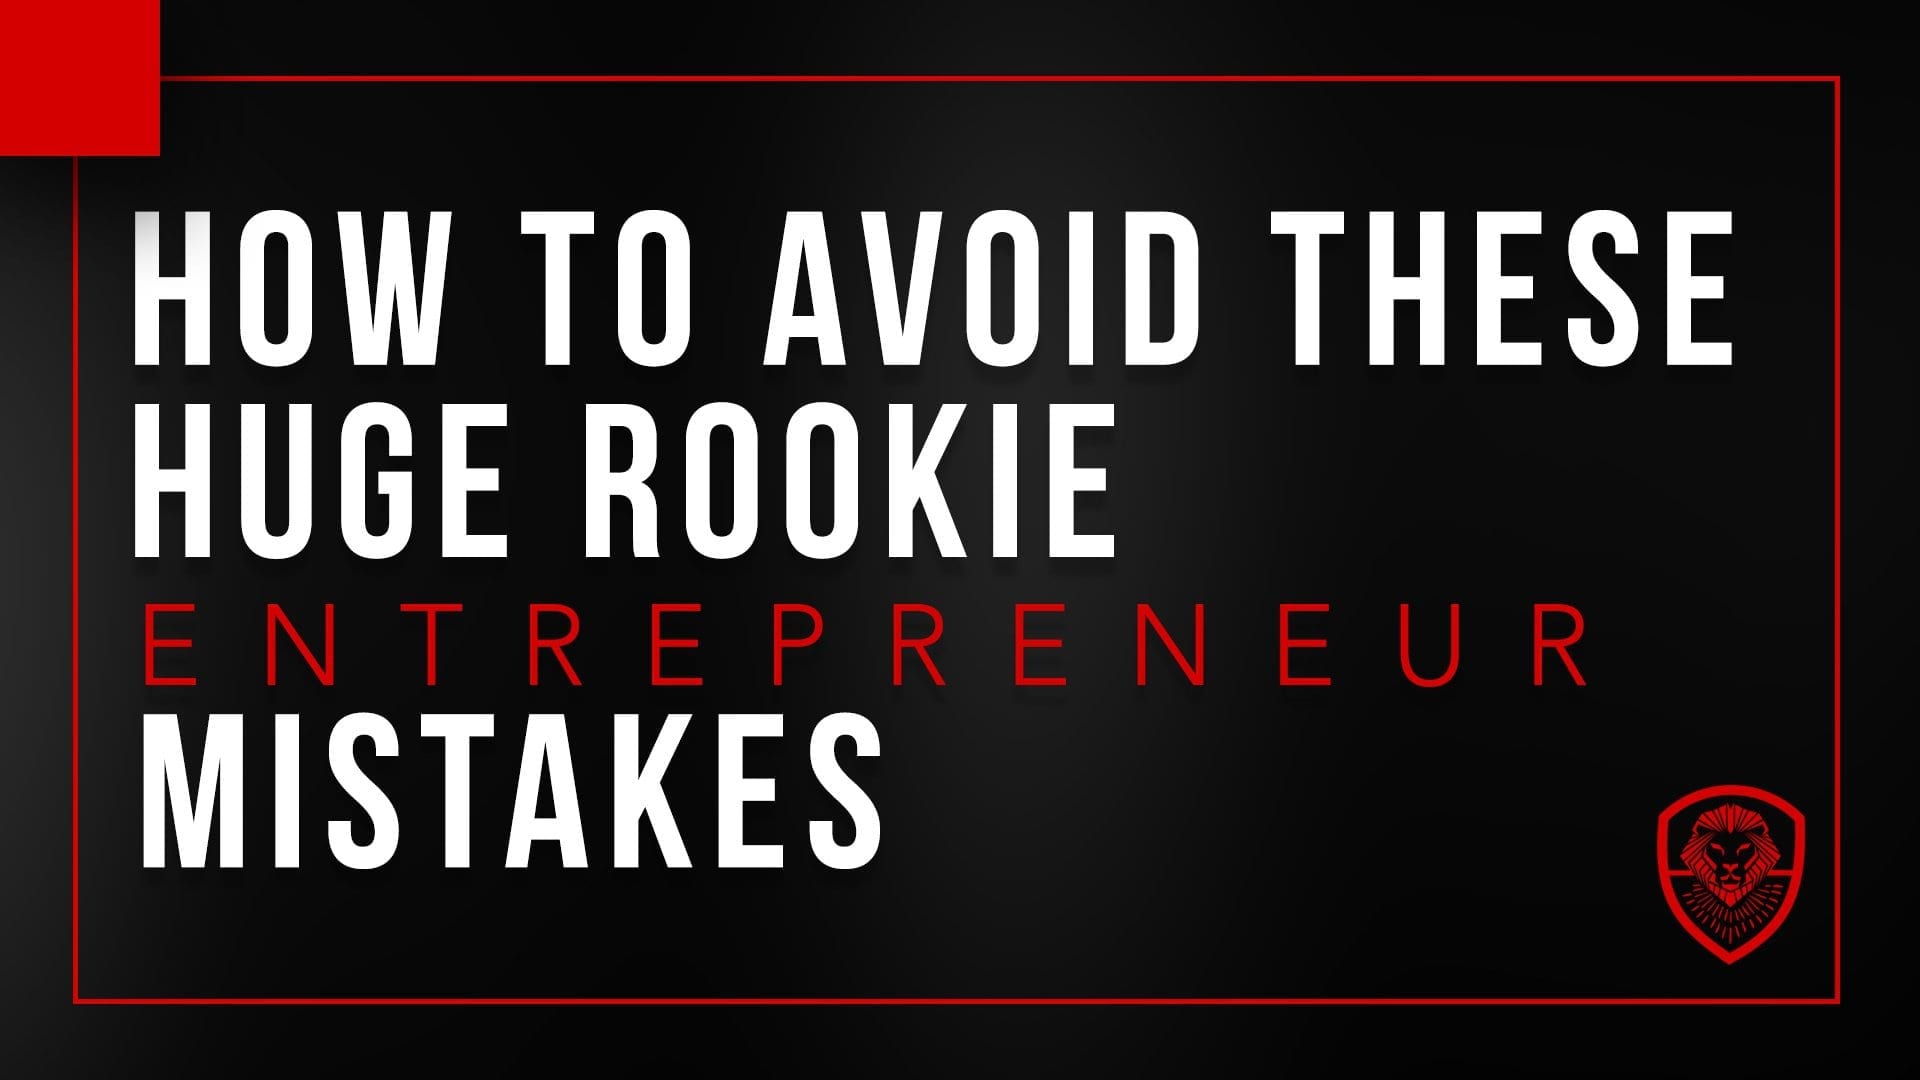 How to Avoid these Huge Rookie Entrepreneur Mistakes